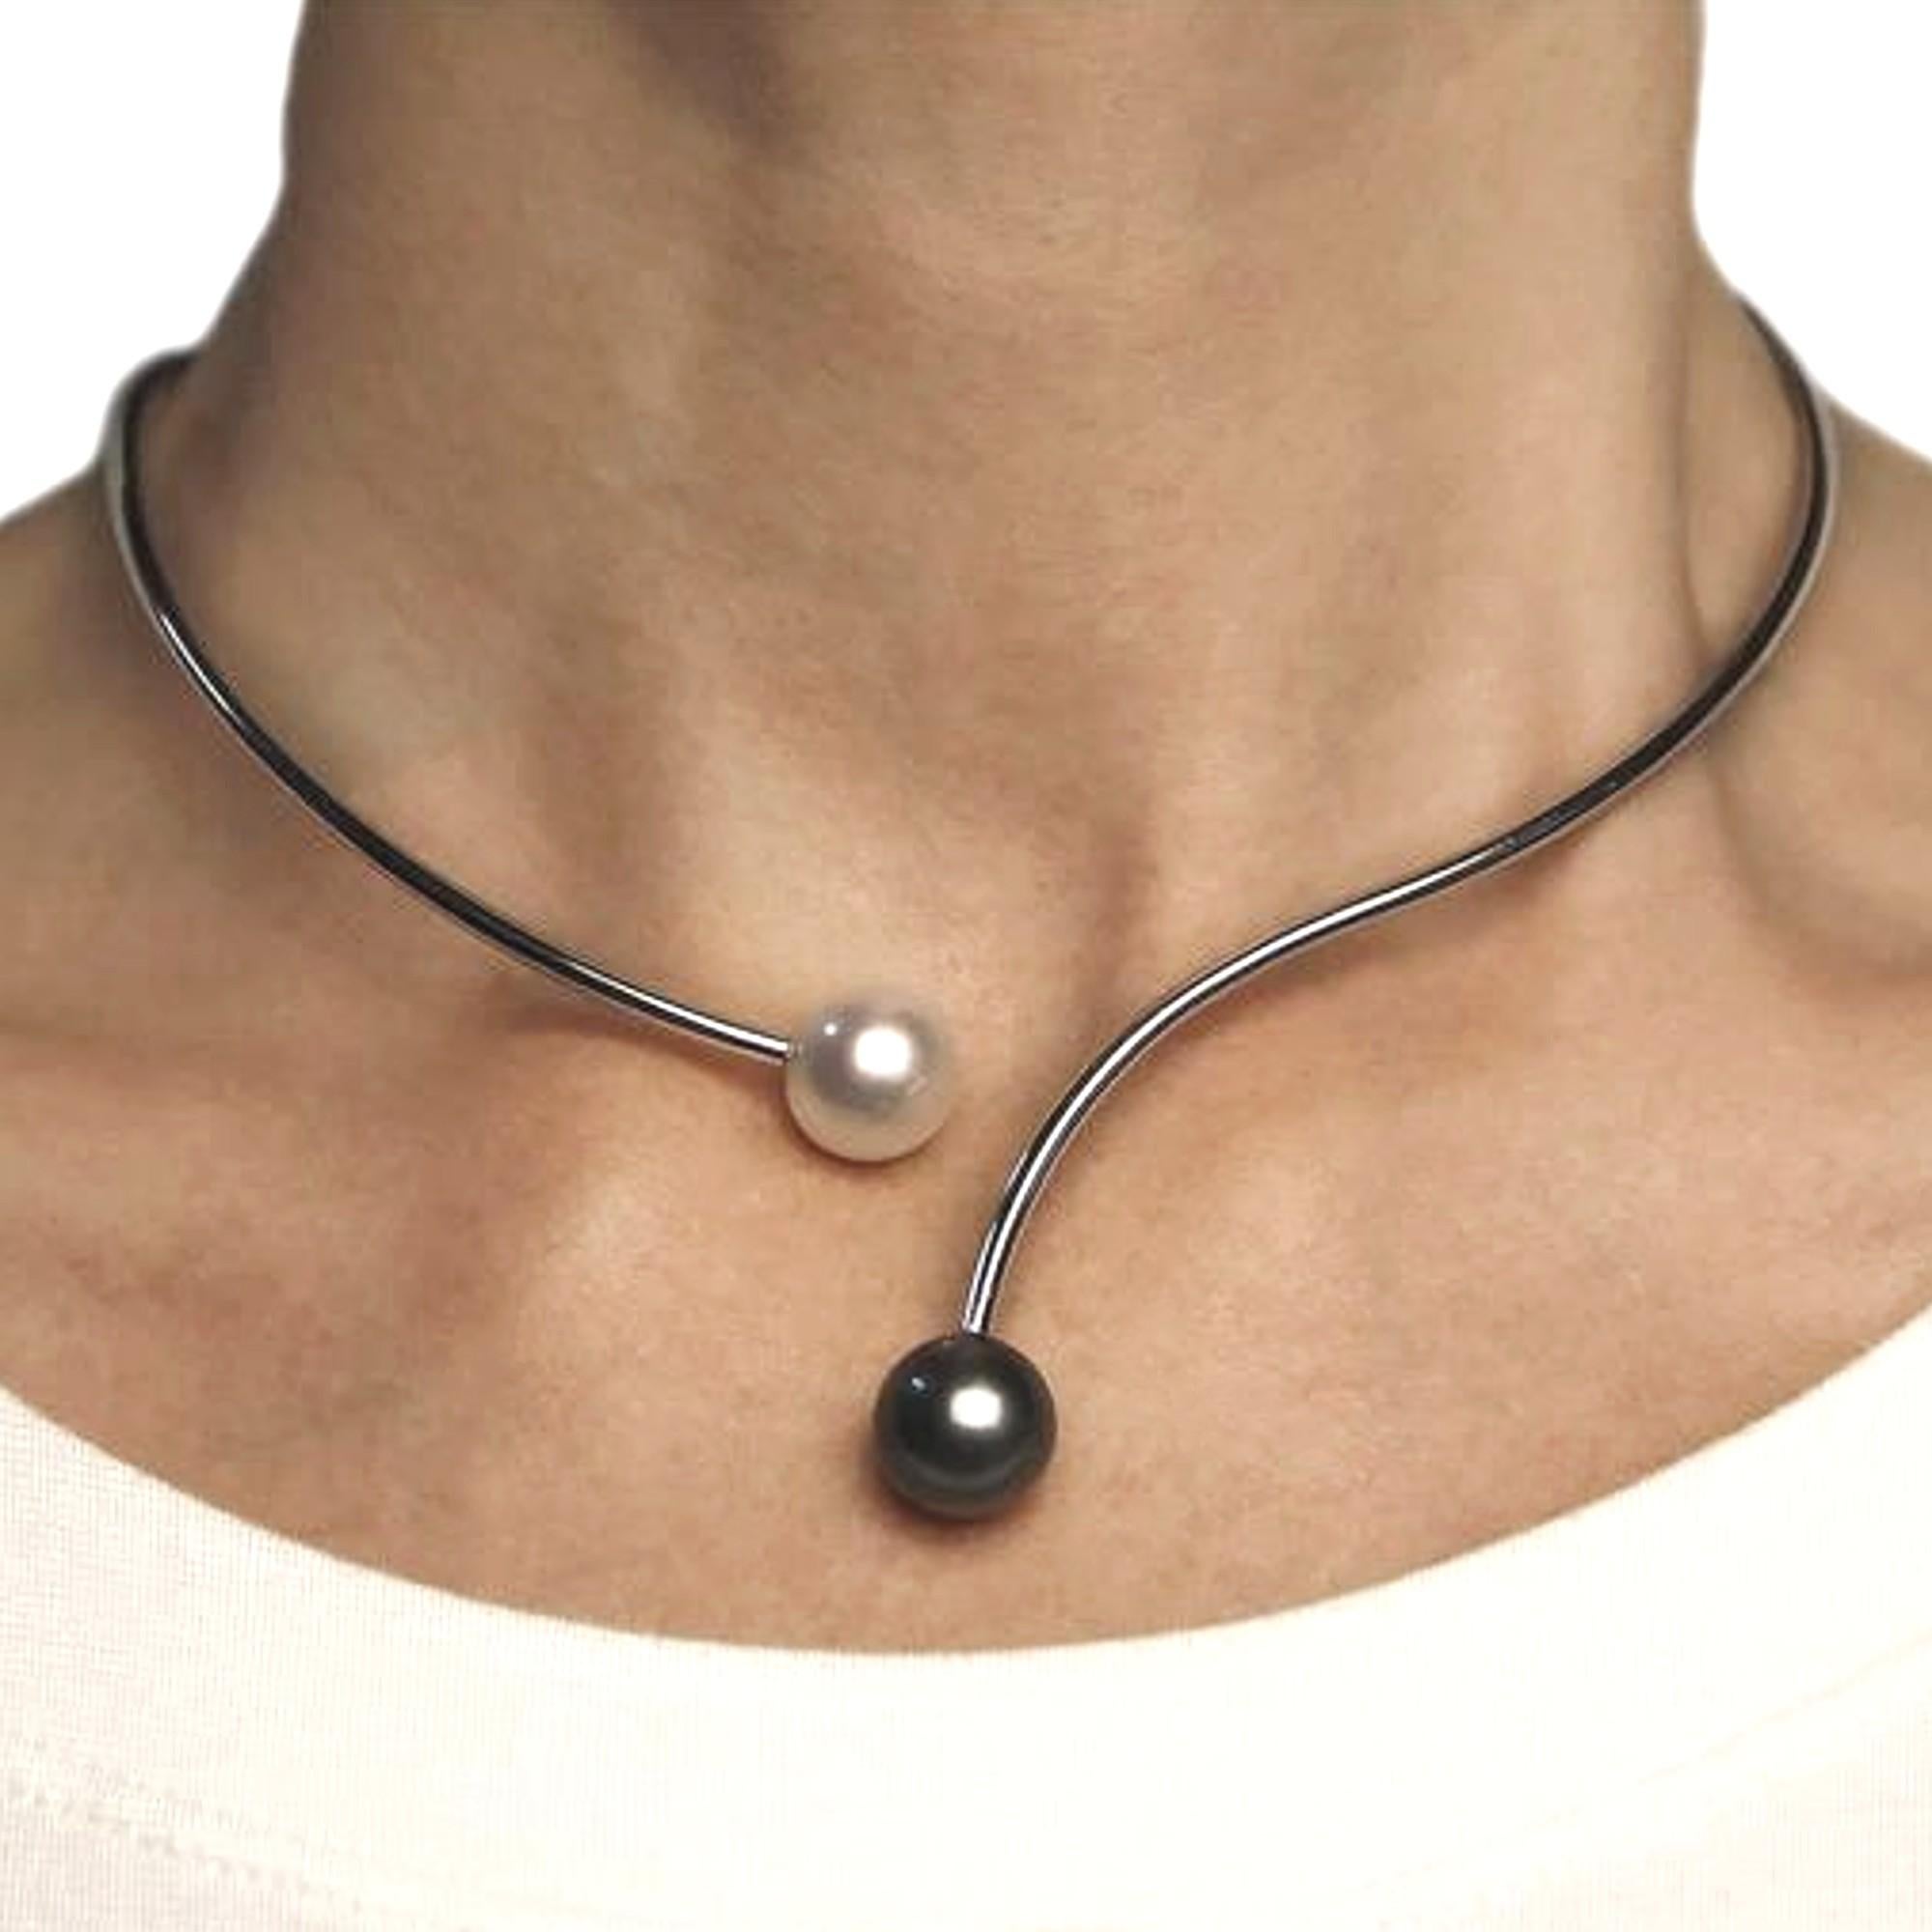 Alex Jona design collection, hand crafted in Italy, 18 karat white gold choker necklace (17 inch/43 cm) with two natural pearls, 11 mm diameter, one white South Sea and one grey from Tahiti.

Alex Jona jewels stand out, not only for their special